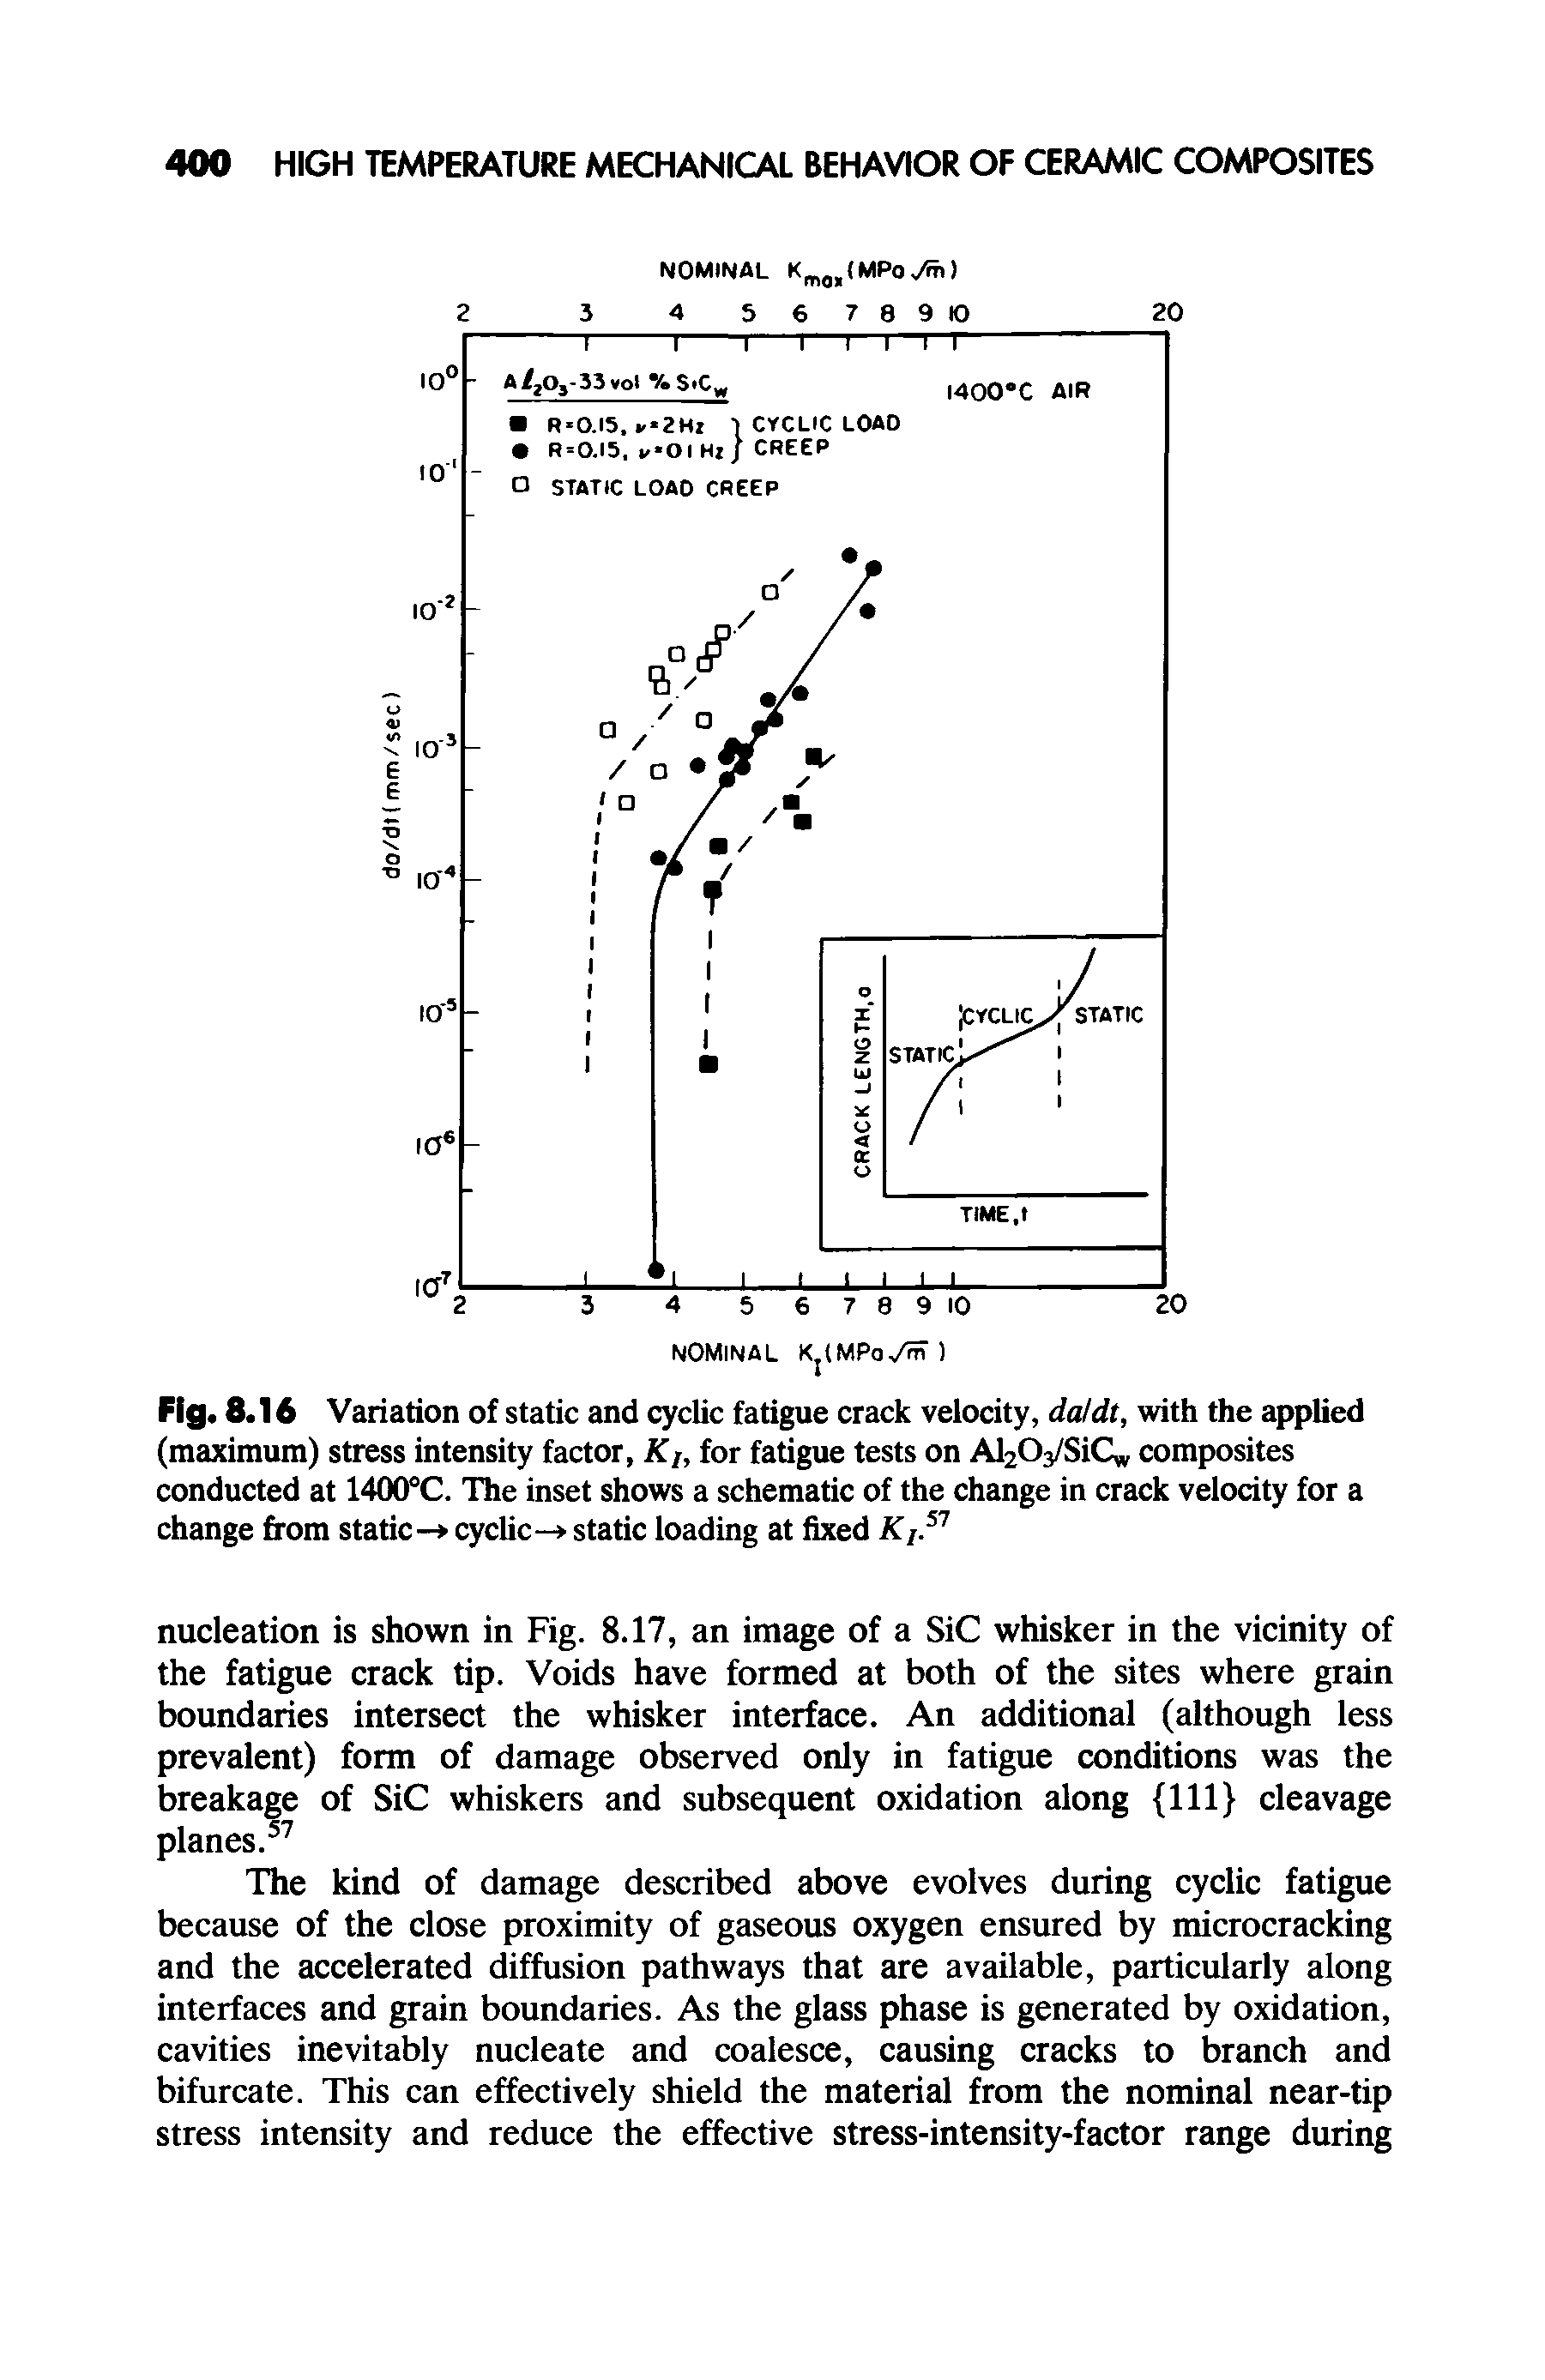 Fig. 8.16 Variation of static and cyclic fatigue crack velocity, daldt, with the applied (maximum) stress intensity factor, KIy for fatigue tests on A CVSiCw composites conducted at 1400°C. The inset shows a schematic of the change in crack velocity for a change from static- cyclic-> static loading at fixed Kt.51...